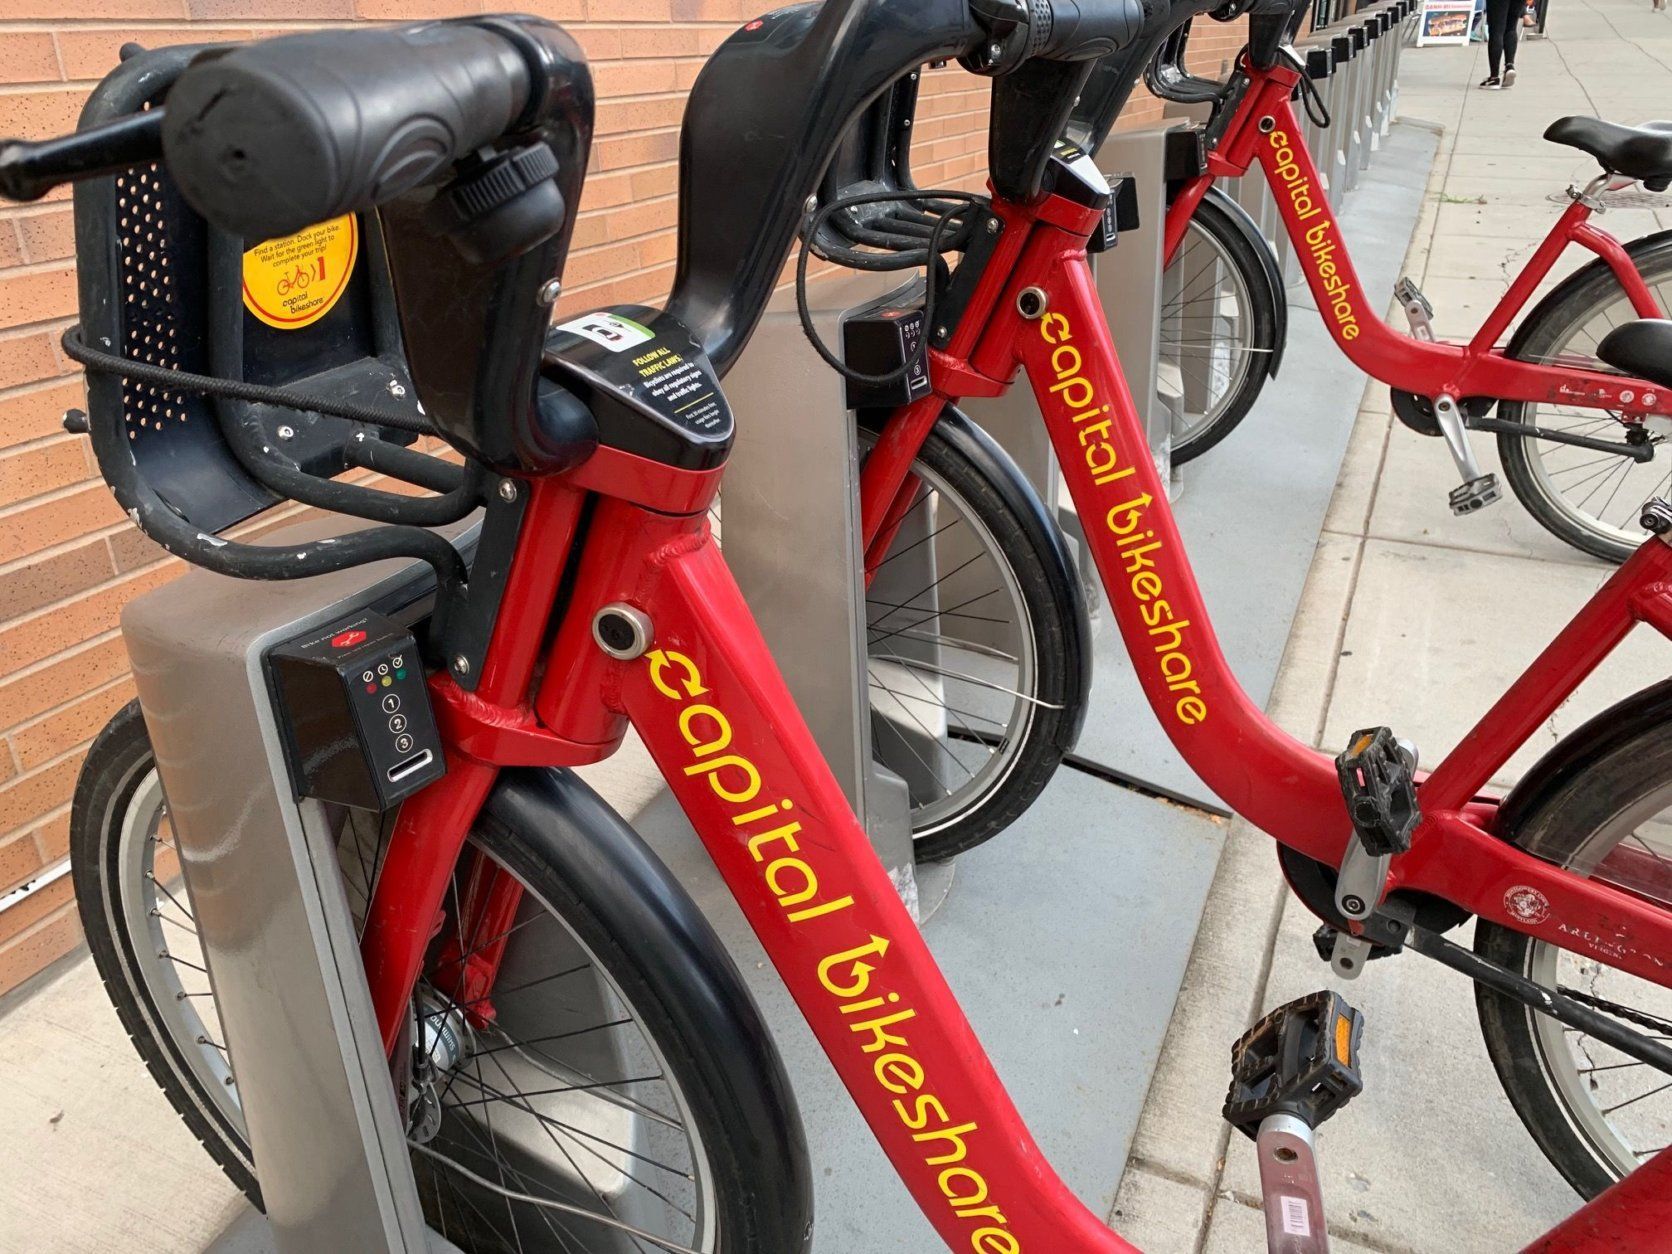 <p><span style="font-weight: 400;"><strong>$8:</strong> For just $8 a month, a <a href="https://www.capitalbikeshare.com/" target="_blank" rel="noopener">Capital BikeShare</a> (many locations in and around D.C.) membership is probably the best ongoing value in my budget (and at the yearly rate of $85, it’s actually only about $7/month). I don’t have to pay to maintain a bike, or worry about locking one up, or have to lug it on the bus or train with me. Some employers include it under their pretax transit benefit options. Plus, I can choose one-way rides if I want a good workout, or only want to ride home from work, so as not to be dripping in sweat around my co-workers. — Noah Frank</span></p>
